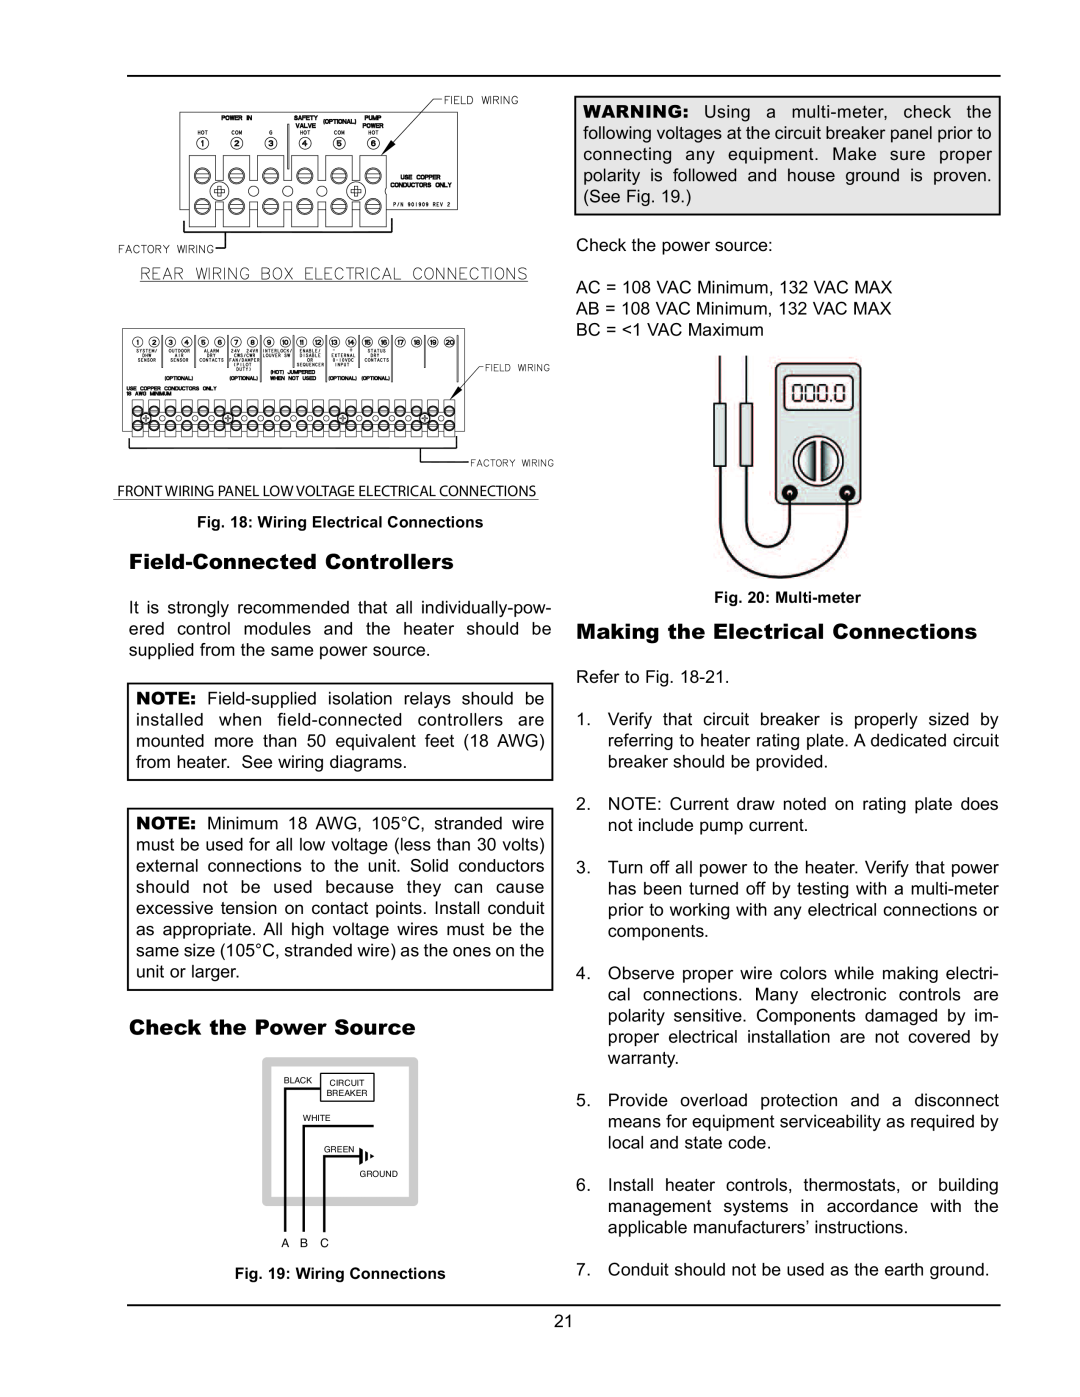 Raypak 503-2003 manual Field-ConnectedControllers, Check the Power Source, Making the Electrical Connections 